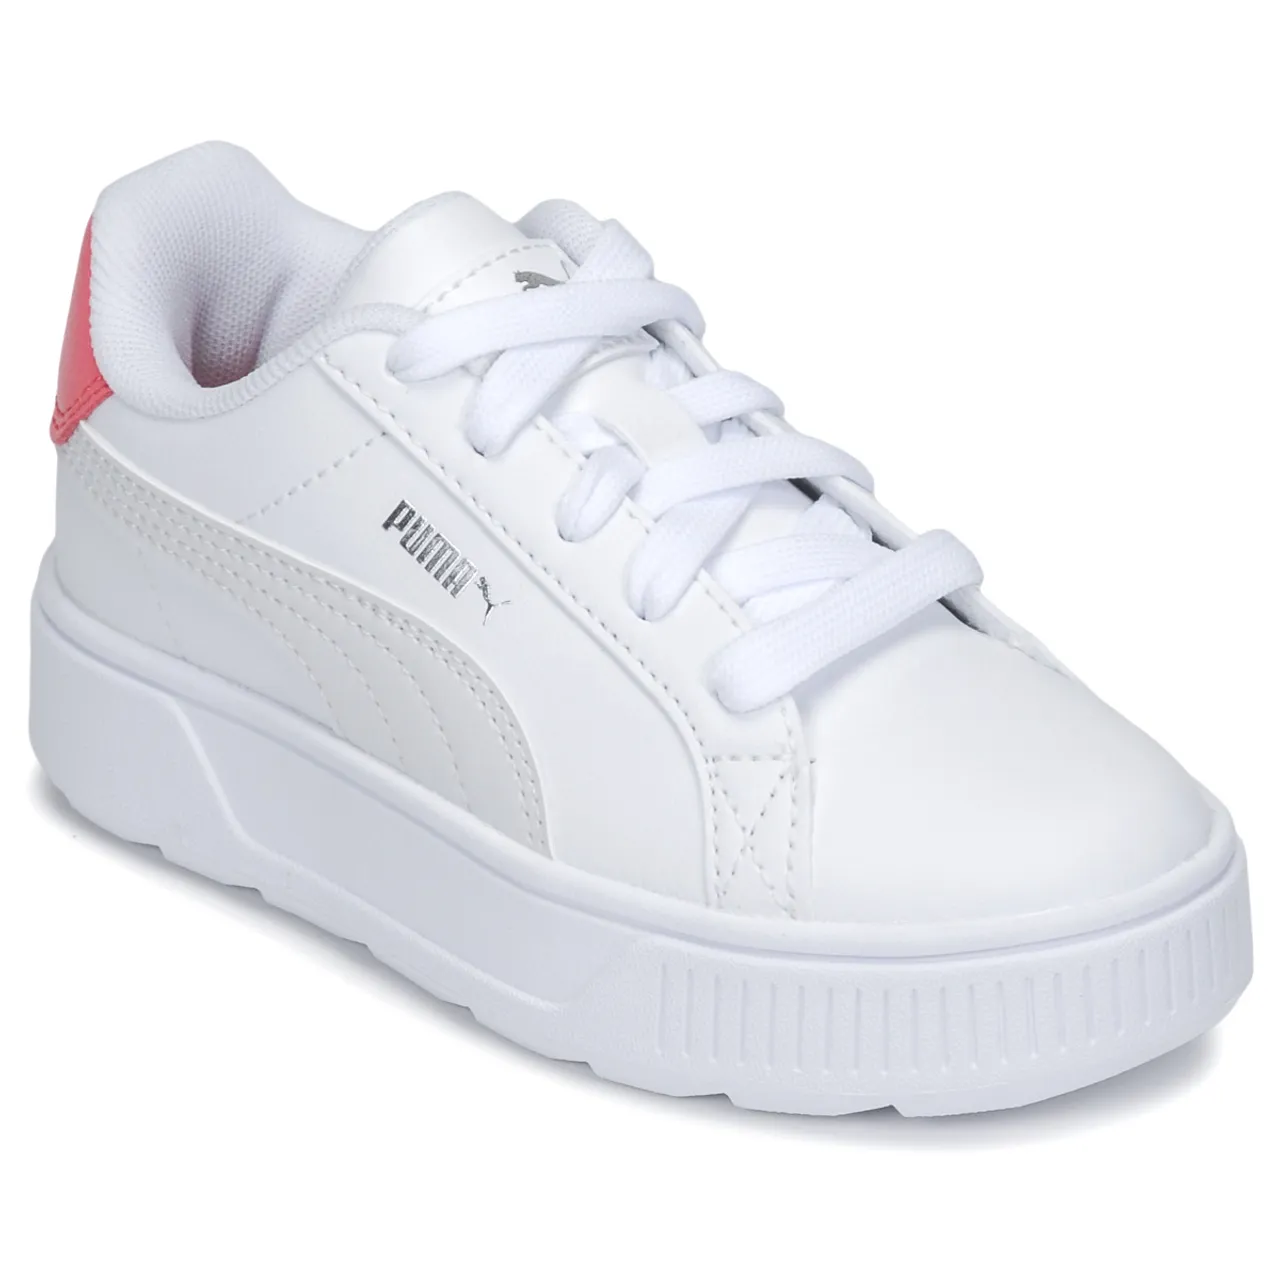 Puma  PS KARMEN L  girls's Children's Shoes (Trainers) in White